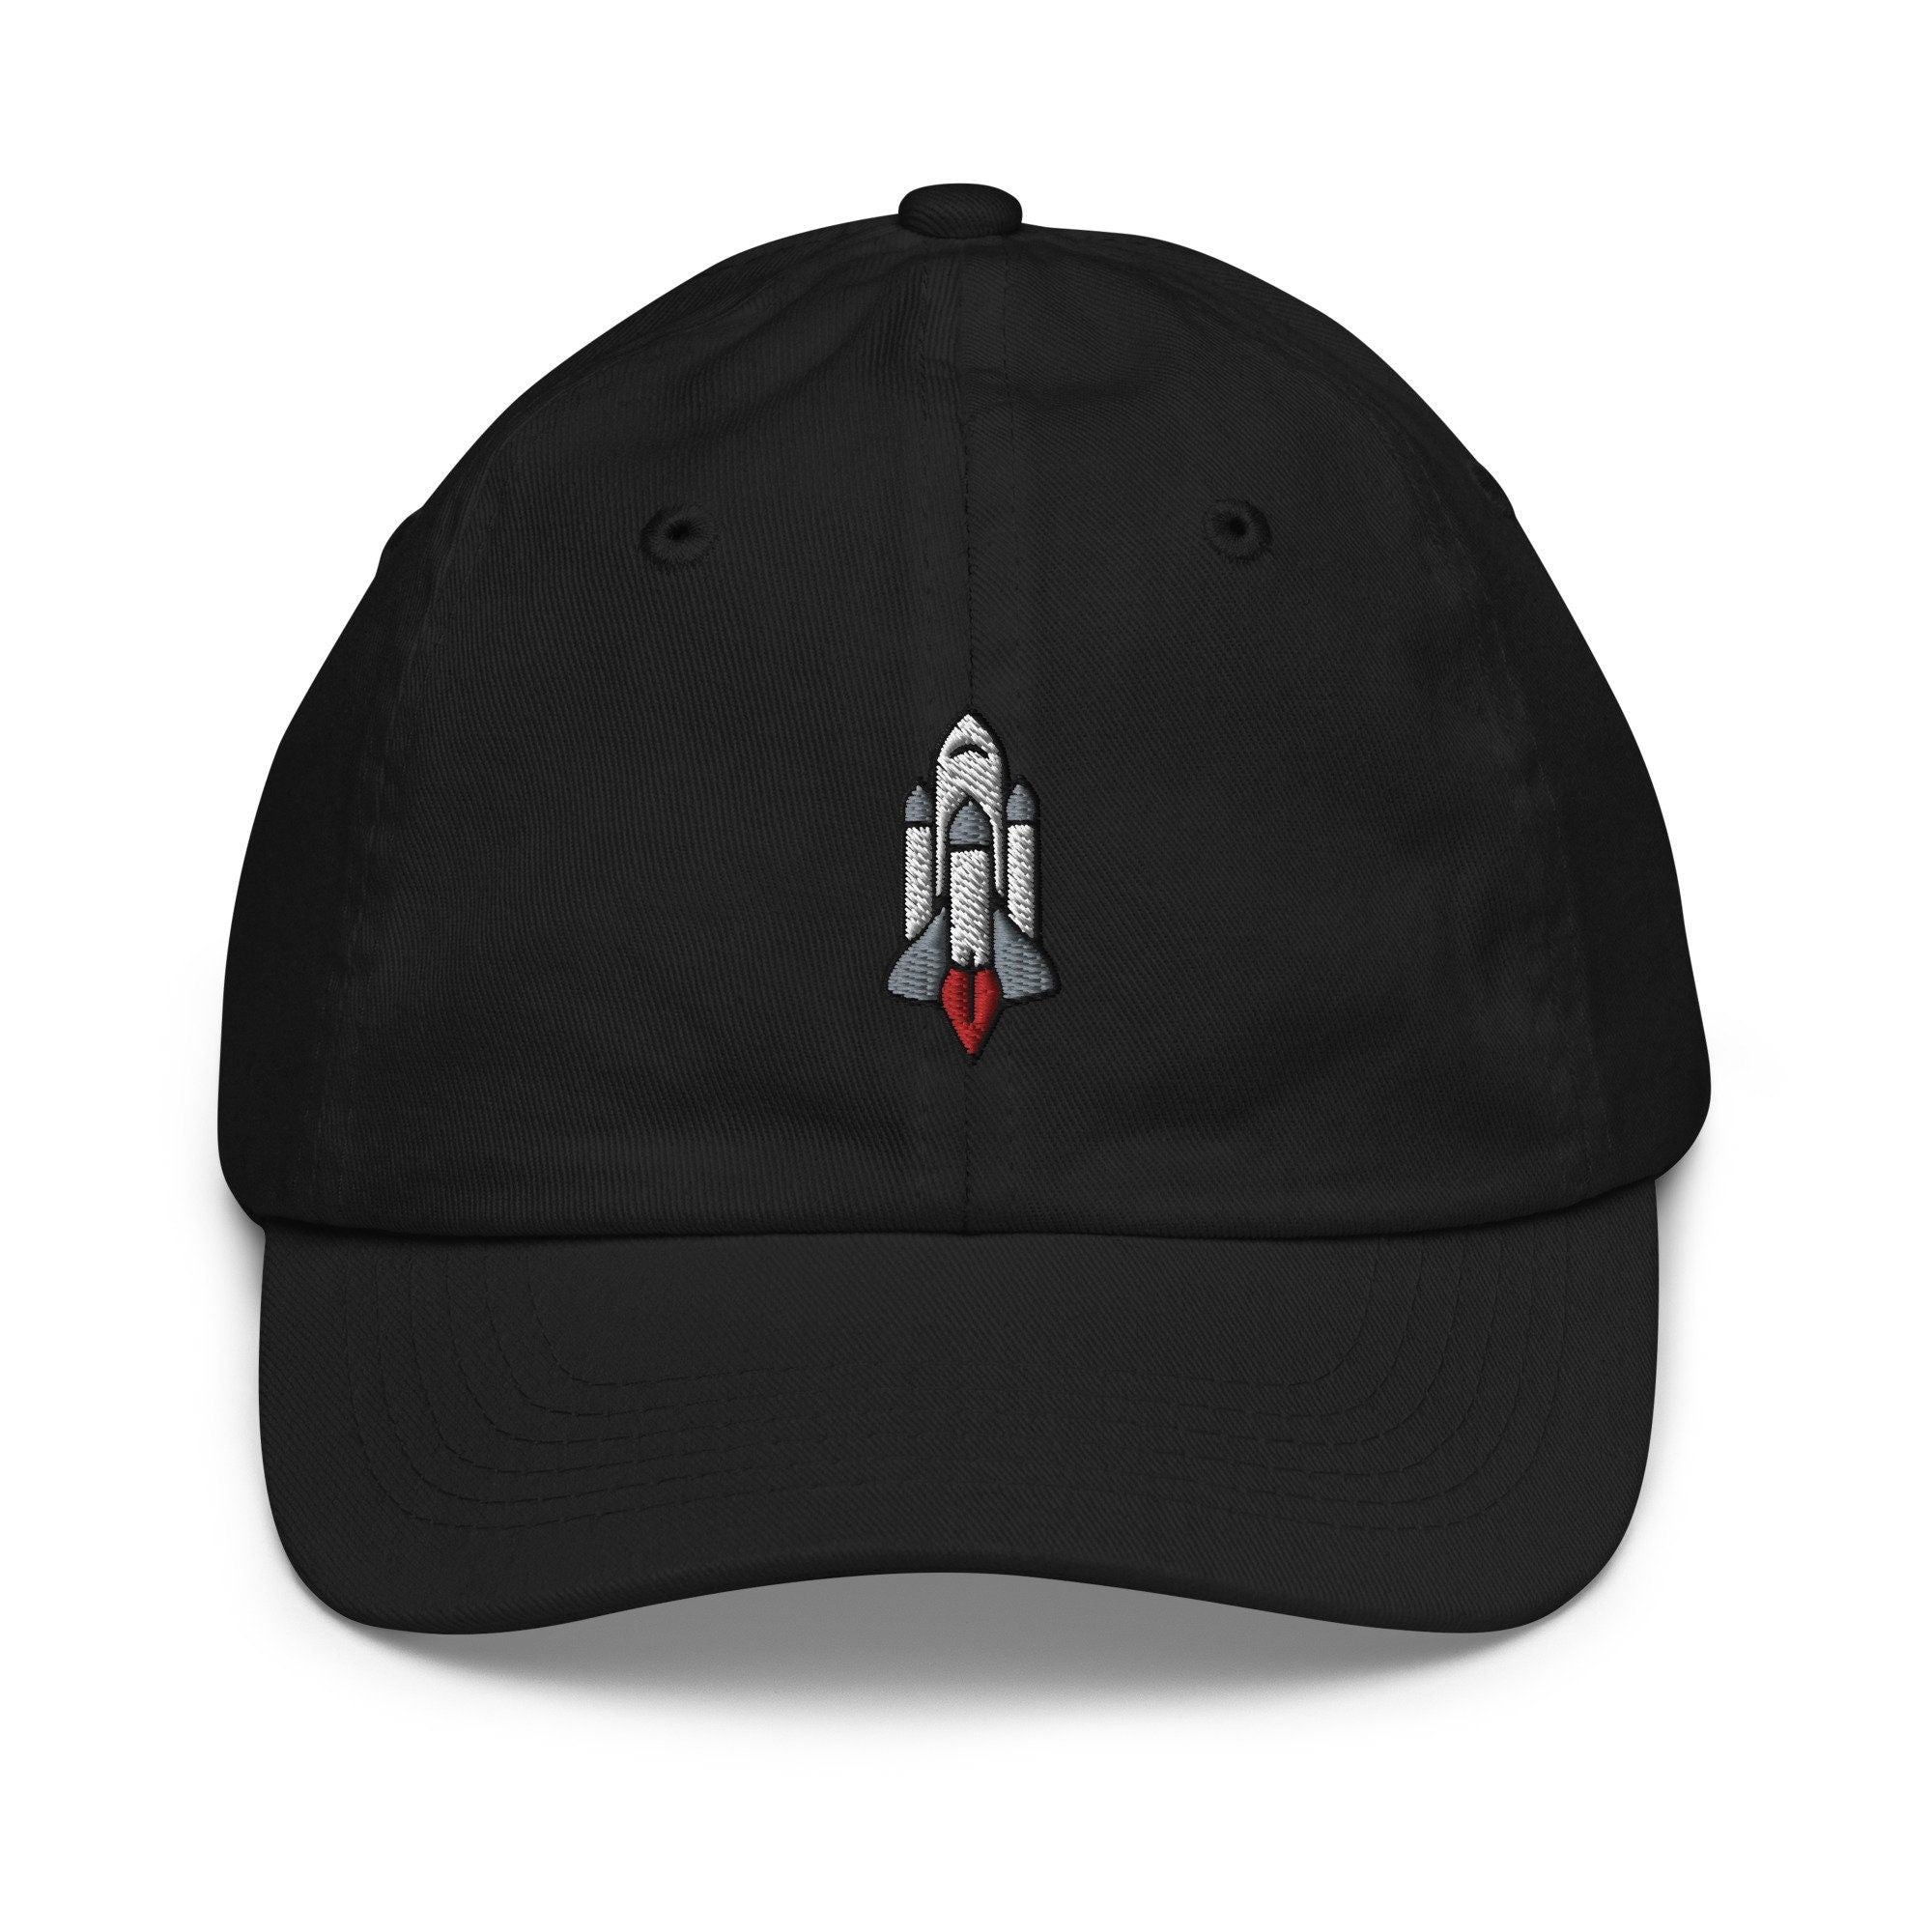 Space Shuttle Youth Baseball Cap, Handmade Kids Hat, Embroidered Childrens Hat Gift - Multiple Colors